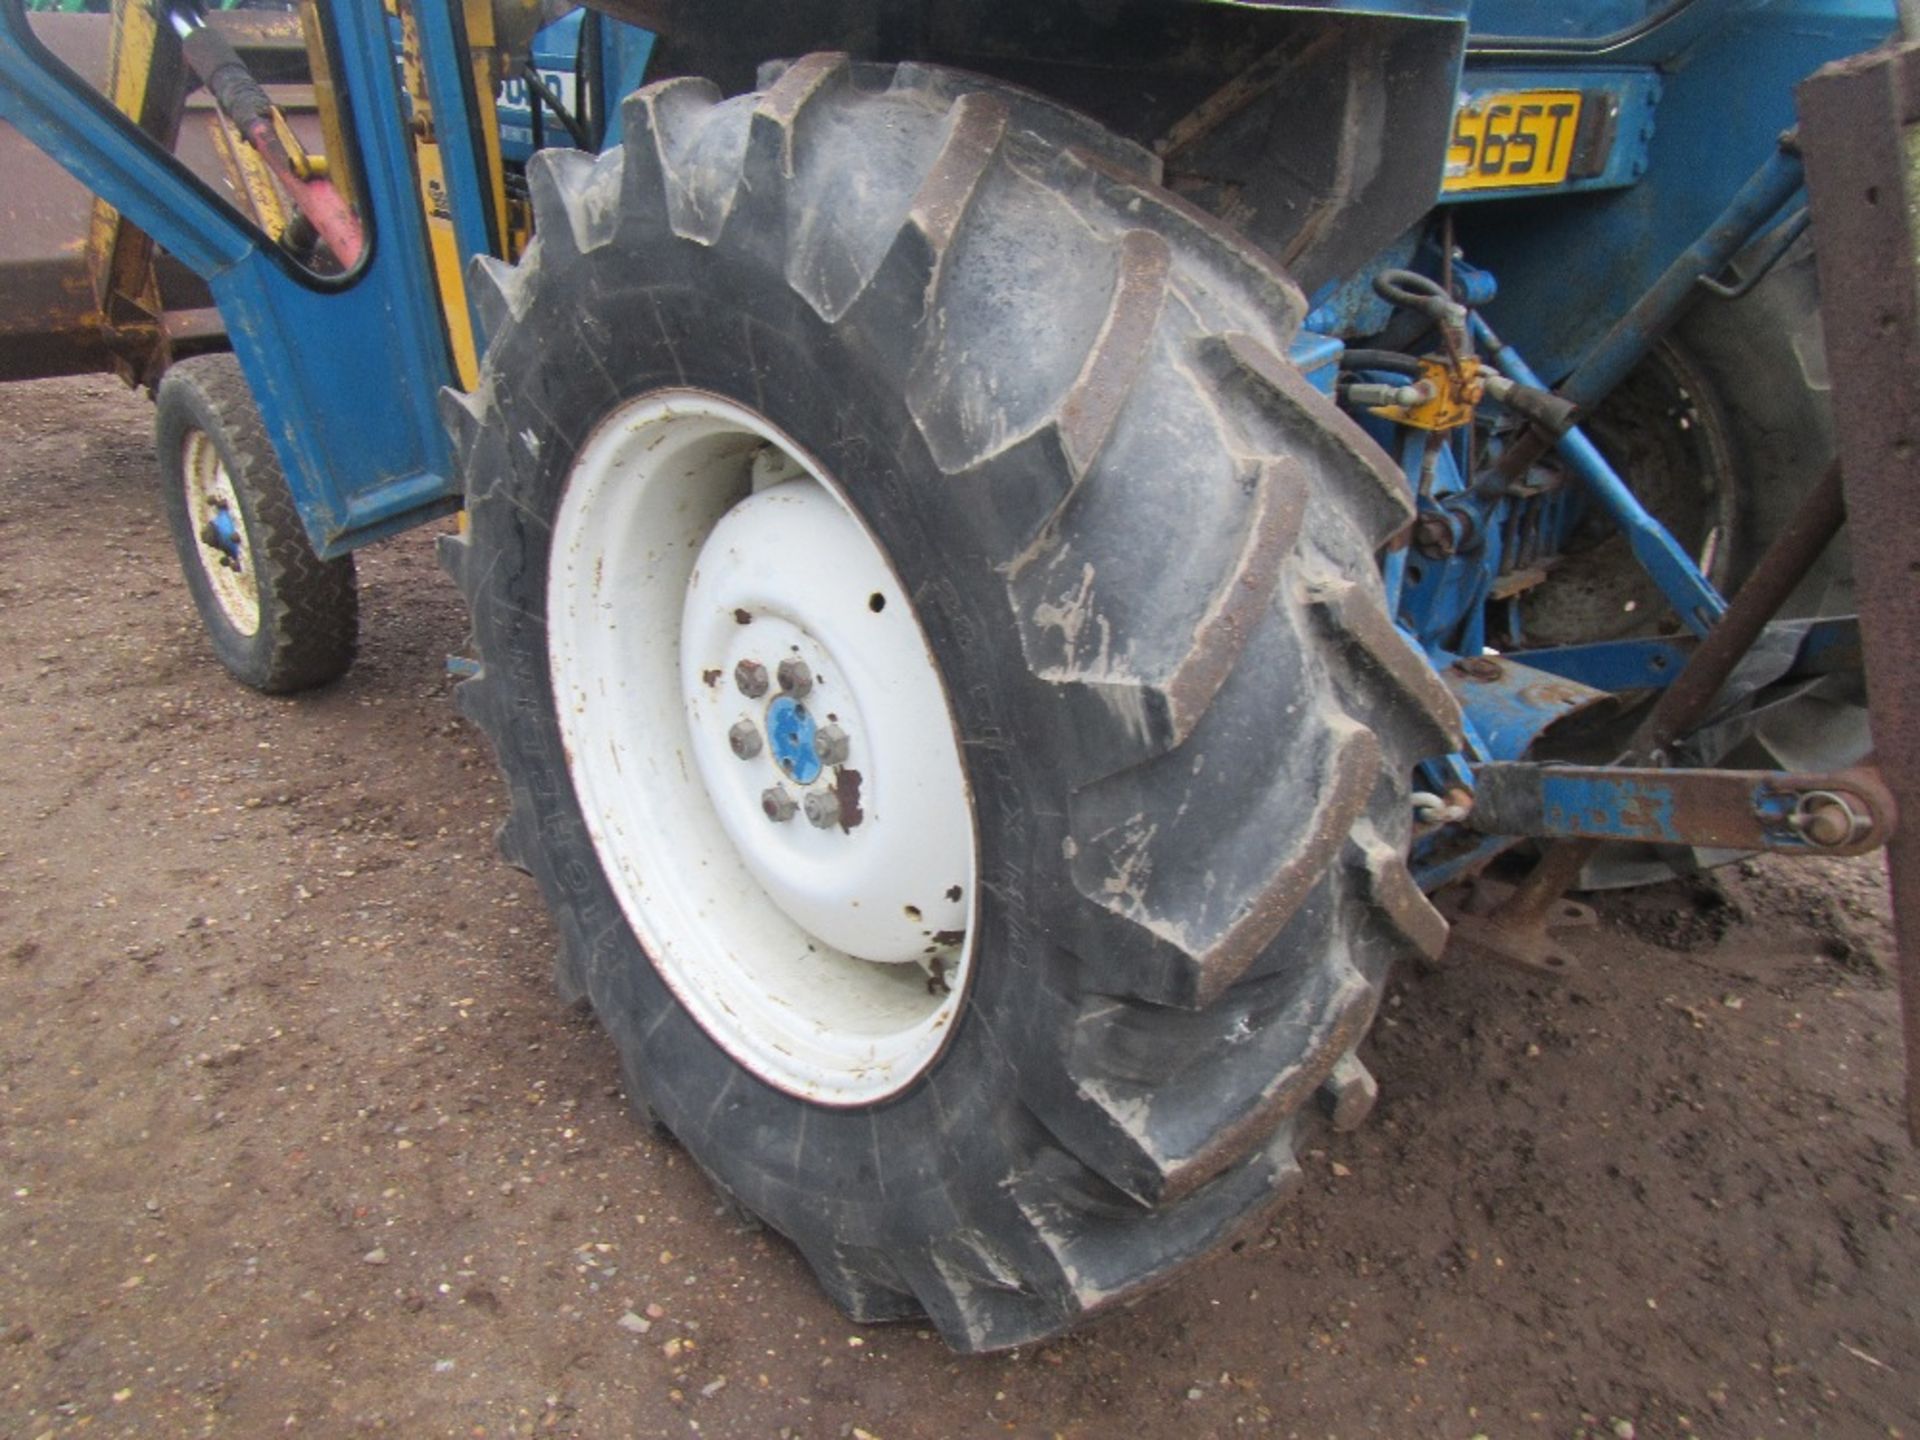 1979 Ford 4600 Tractor. Loader, Power Steering, Bucket, 14.9R28 Tyres. 2887 hrs. Ser No B999392 - Image 11 of 18